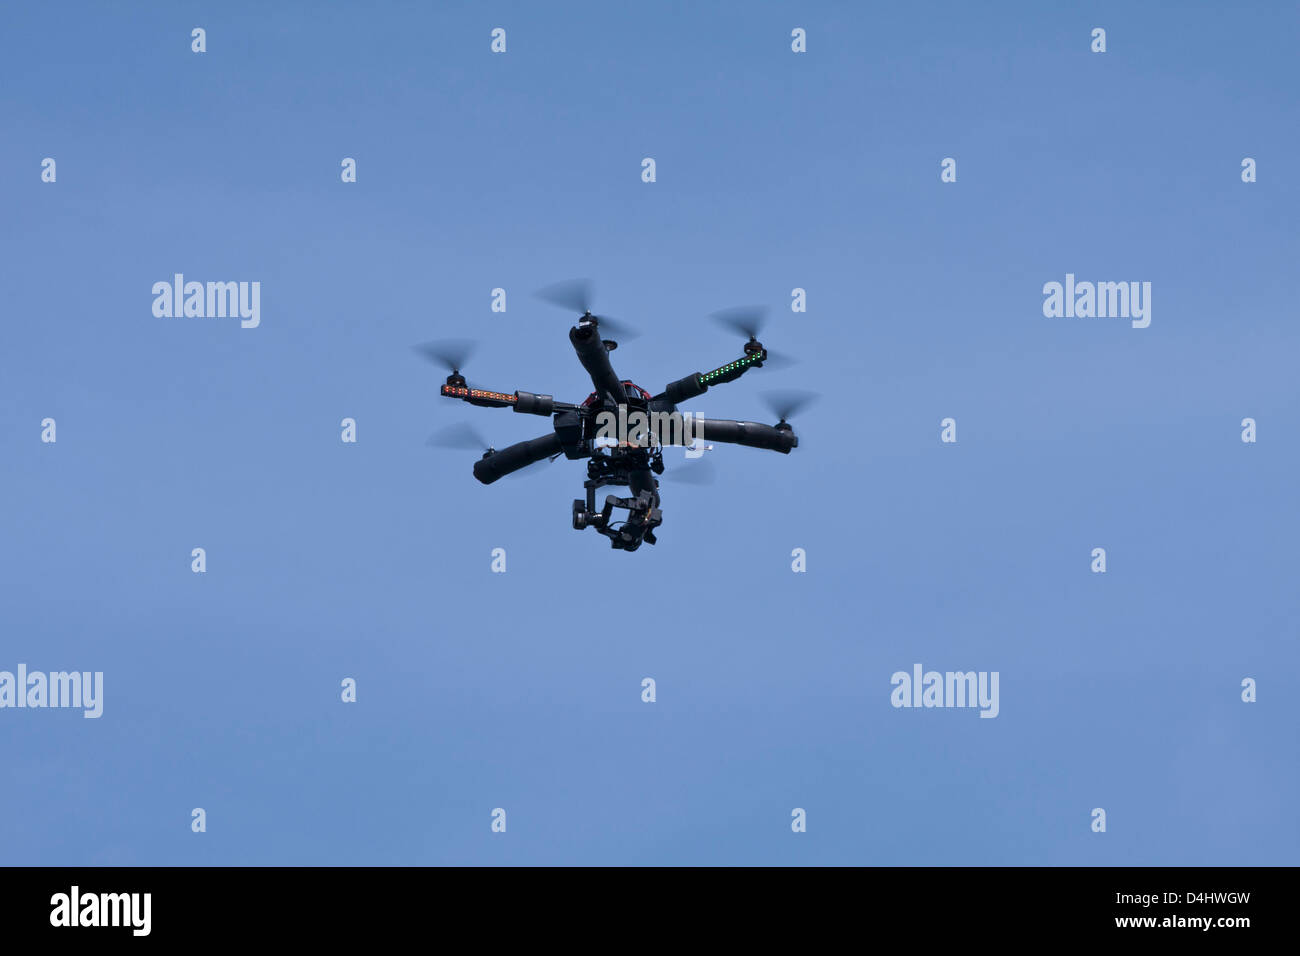 Remote radio controlled helicopter with a small video camera flies against a blue sky. Stock Photo